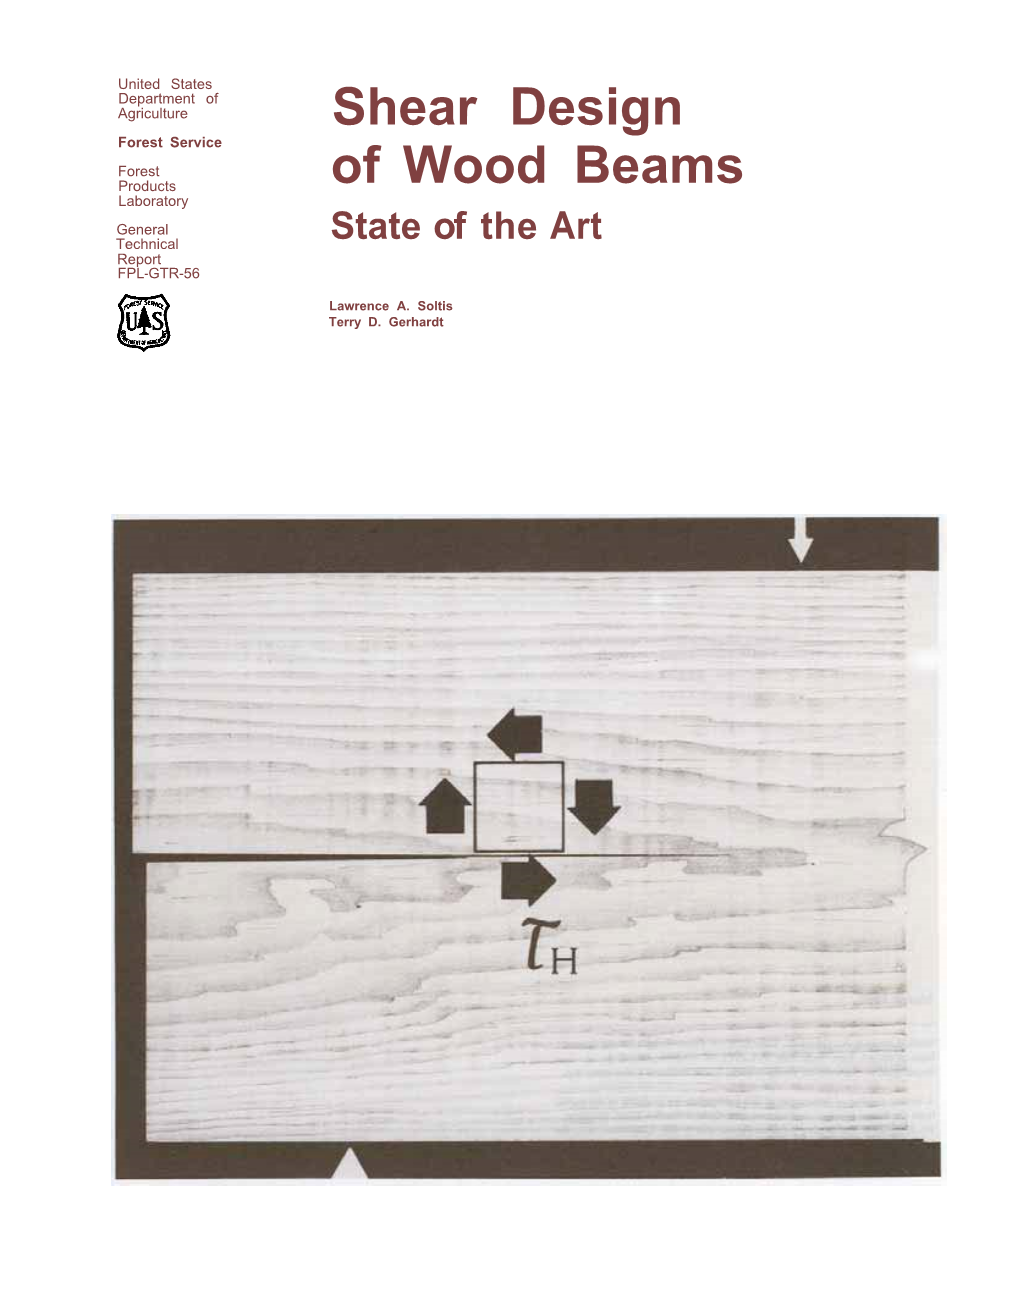 Shear Design of Wood Beams: State of the Art